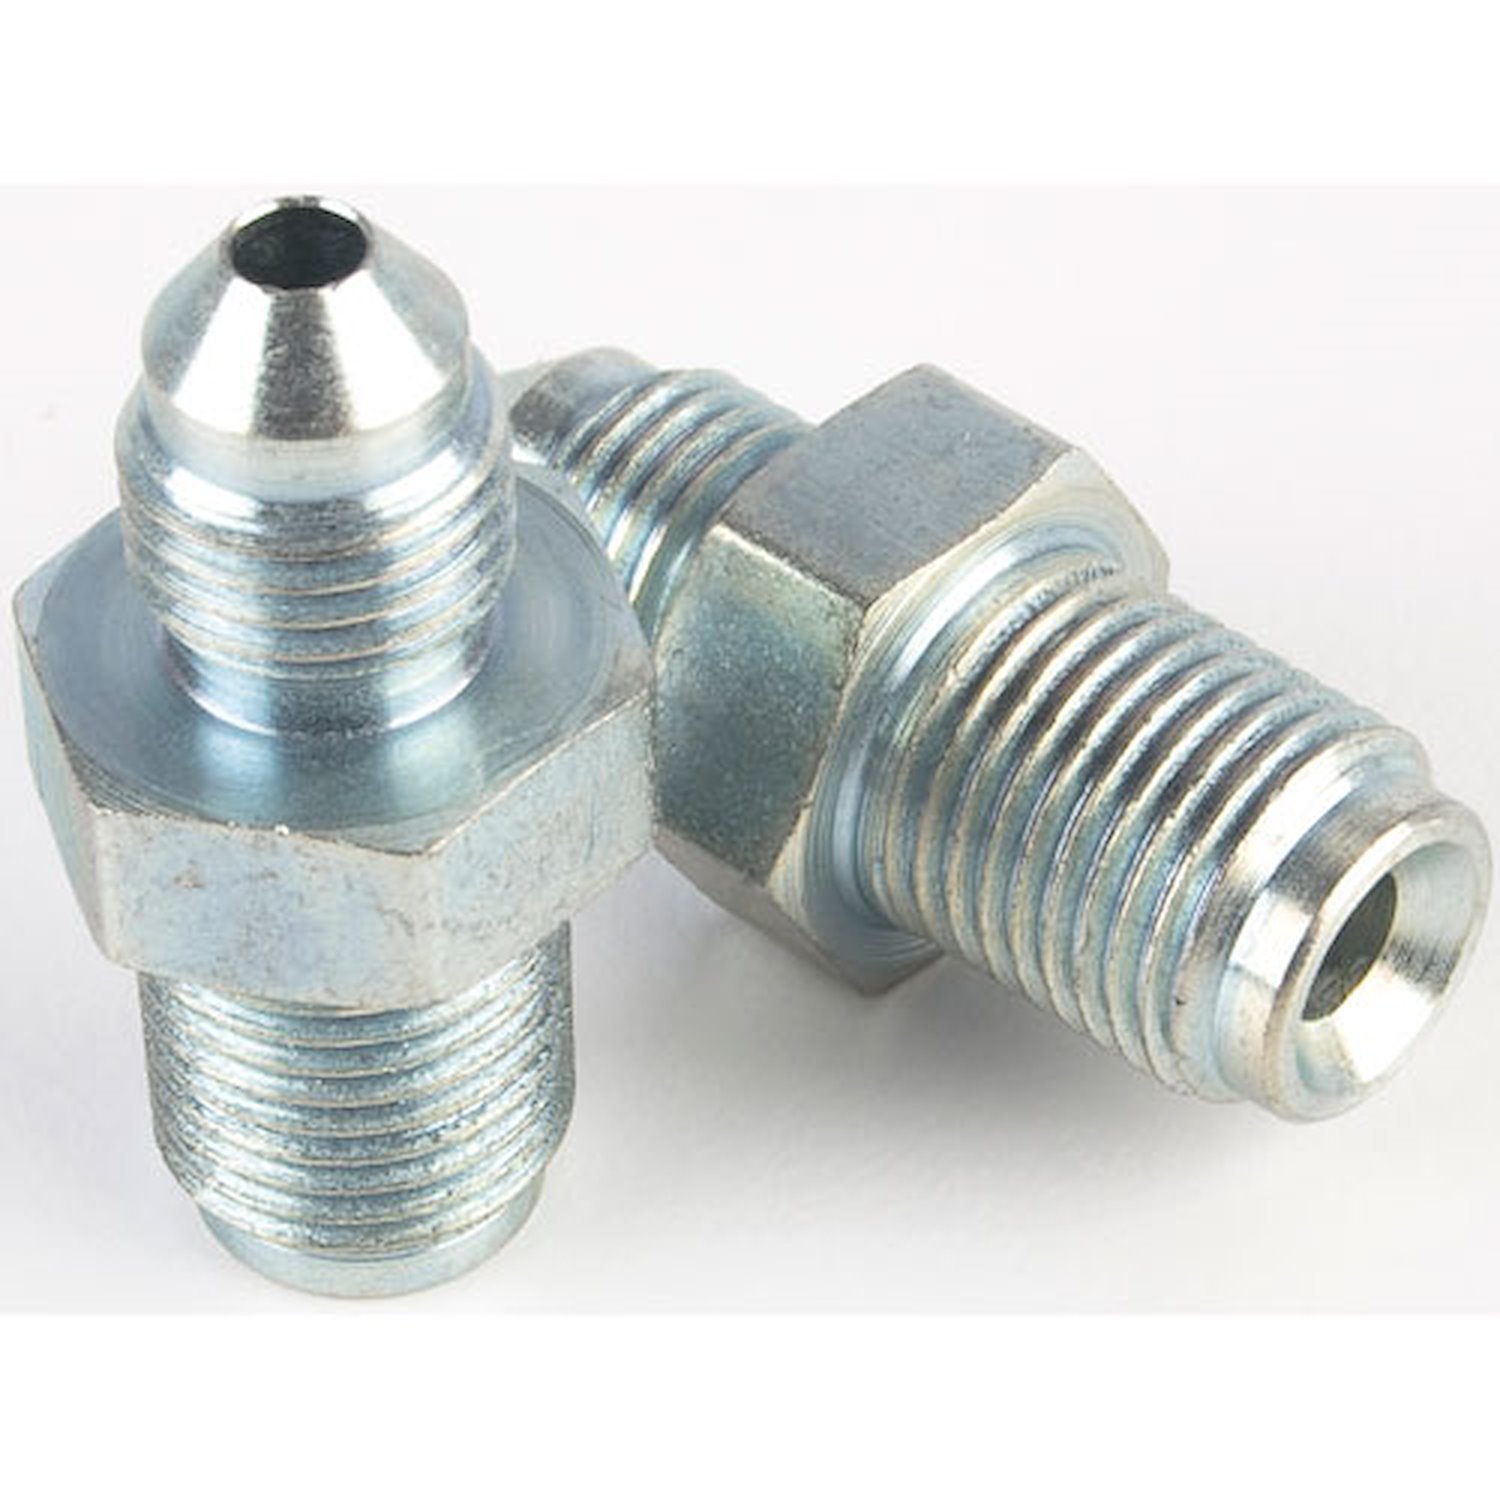 AN to Inverted Flare Male Brake Adapter Fittings [-3 AN x 7/16 in.-24 Male Inverted Flare]